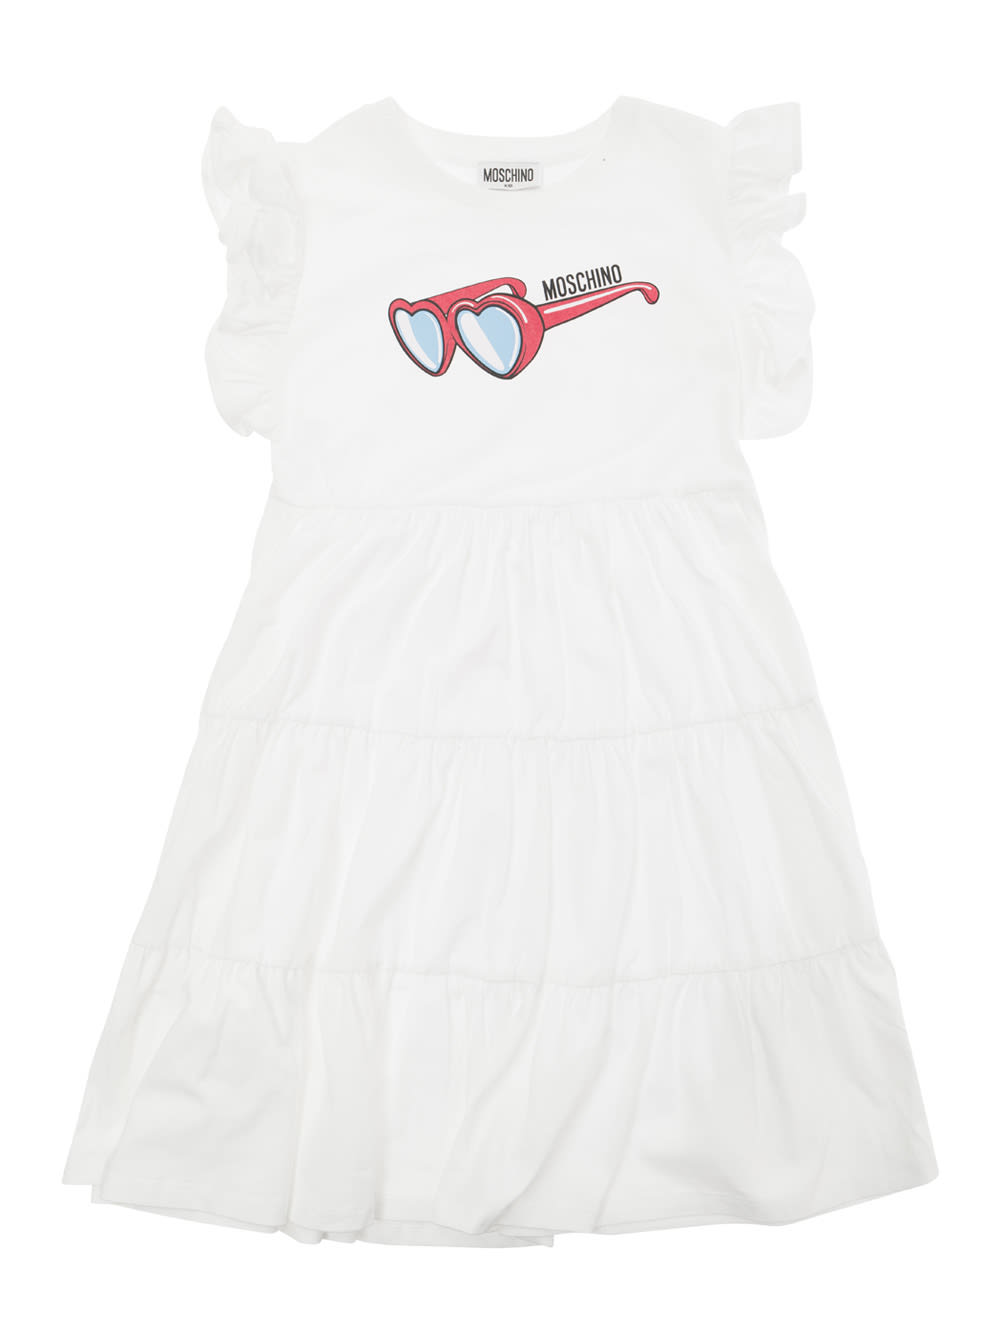 MOSCHINO WHITE FLOUNCED DRESS WITH SUNGLASSES PRINT IN STRETCH COTTON GIRL